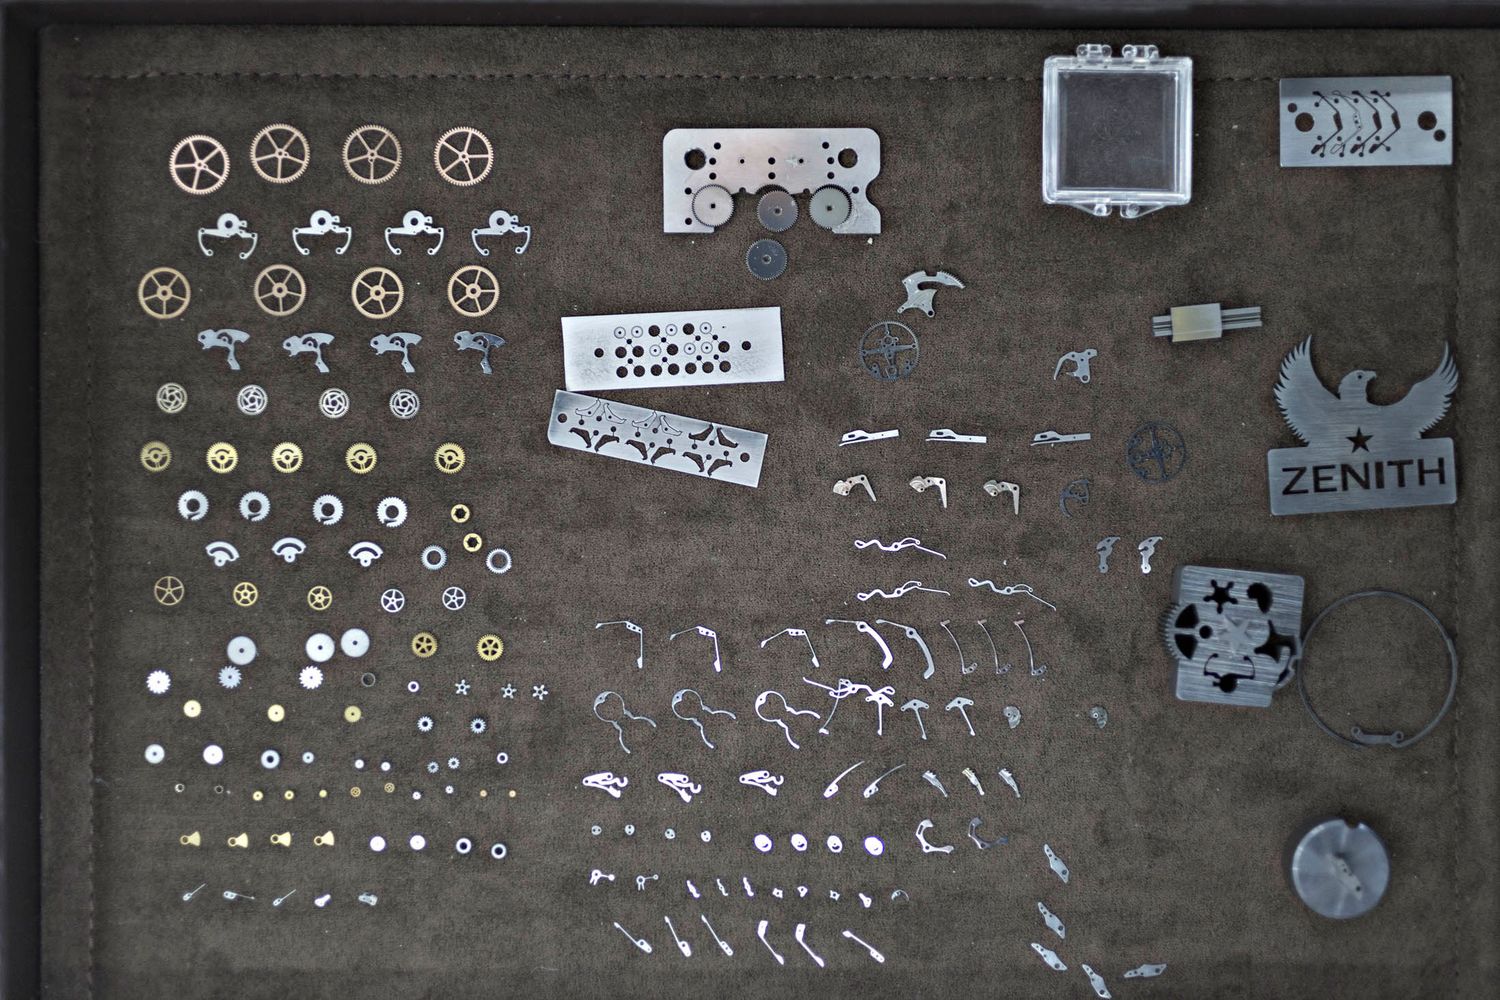 Wristwatch components sit ready for assembly. These tiny arms and balance wheels are all manually assembled by workers, using microscopic lenses in ultra-sterile workspaces.